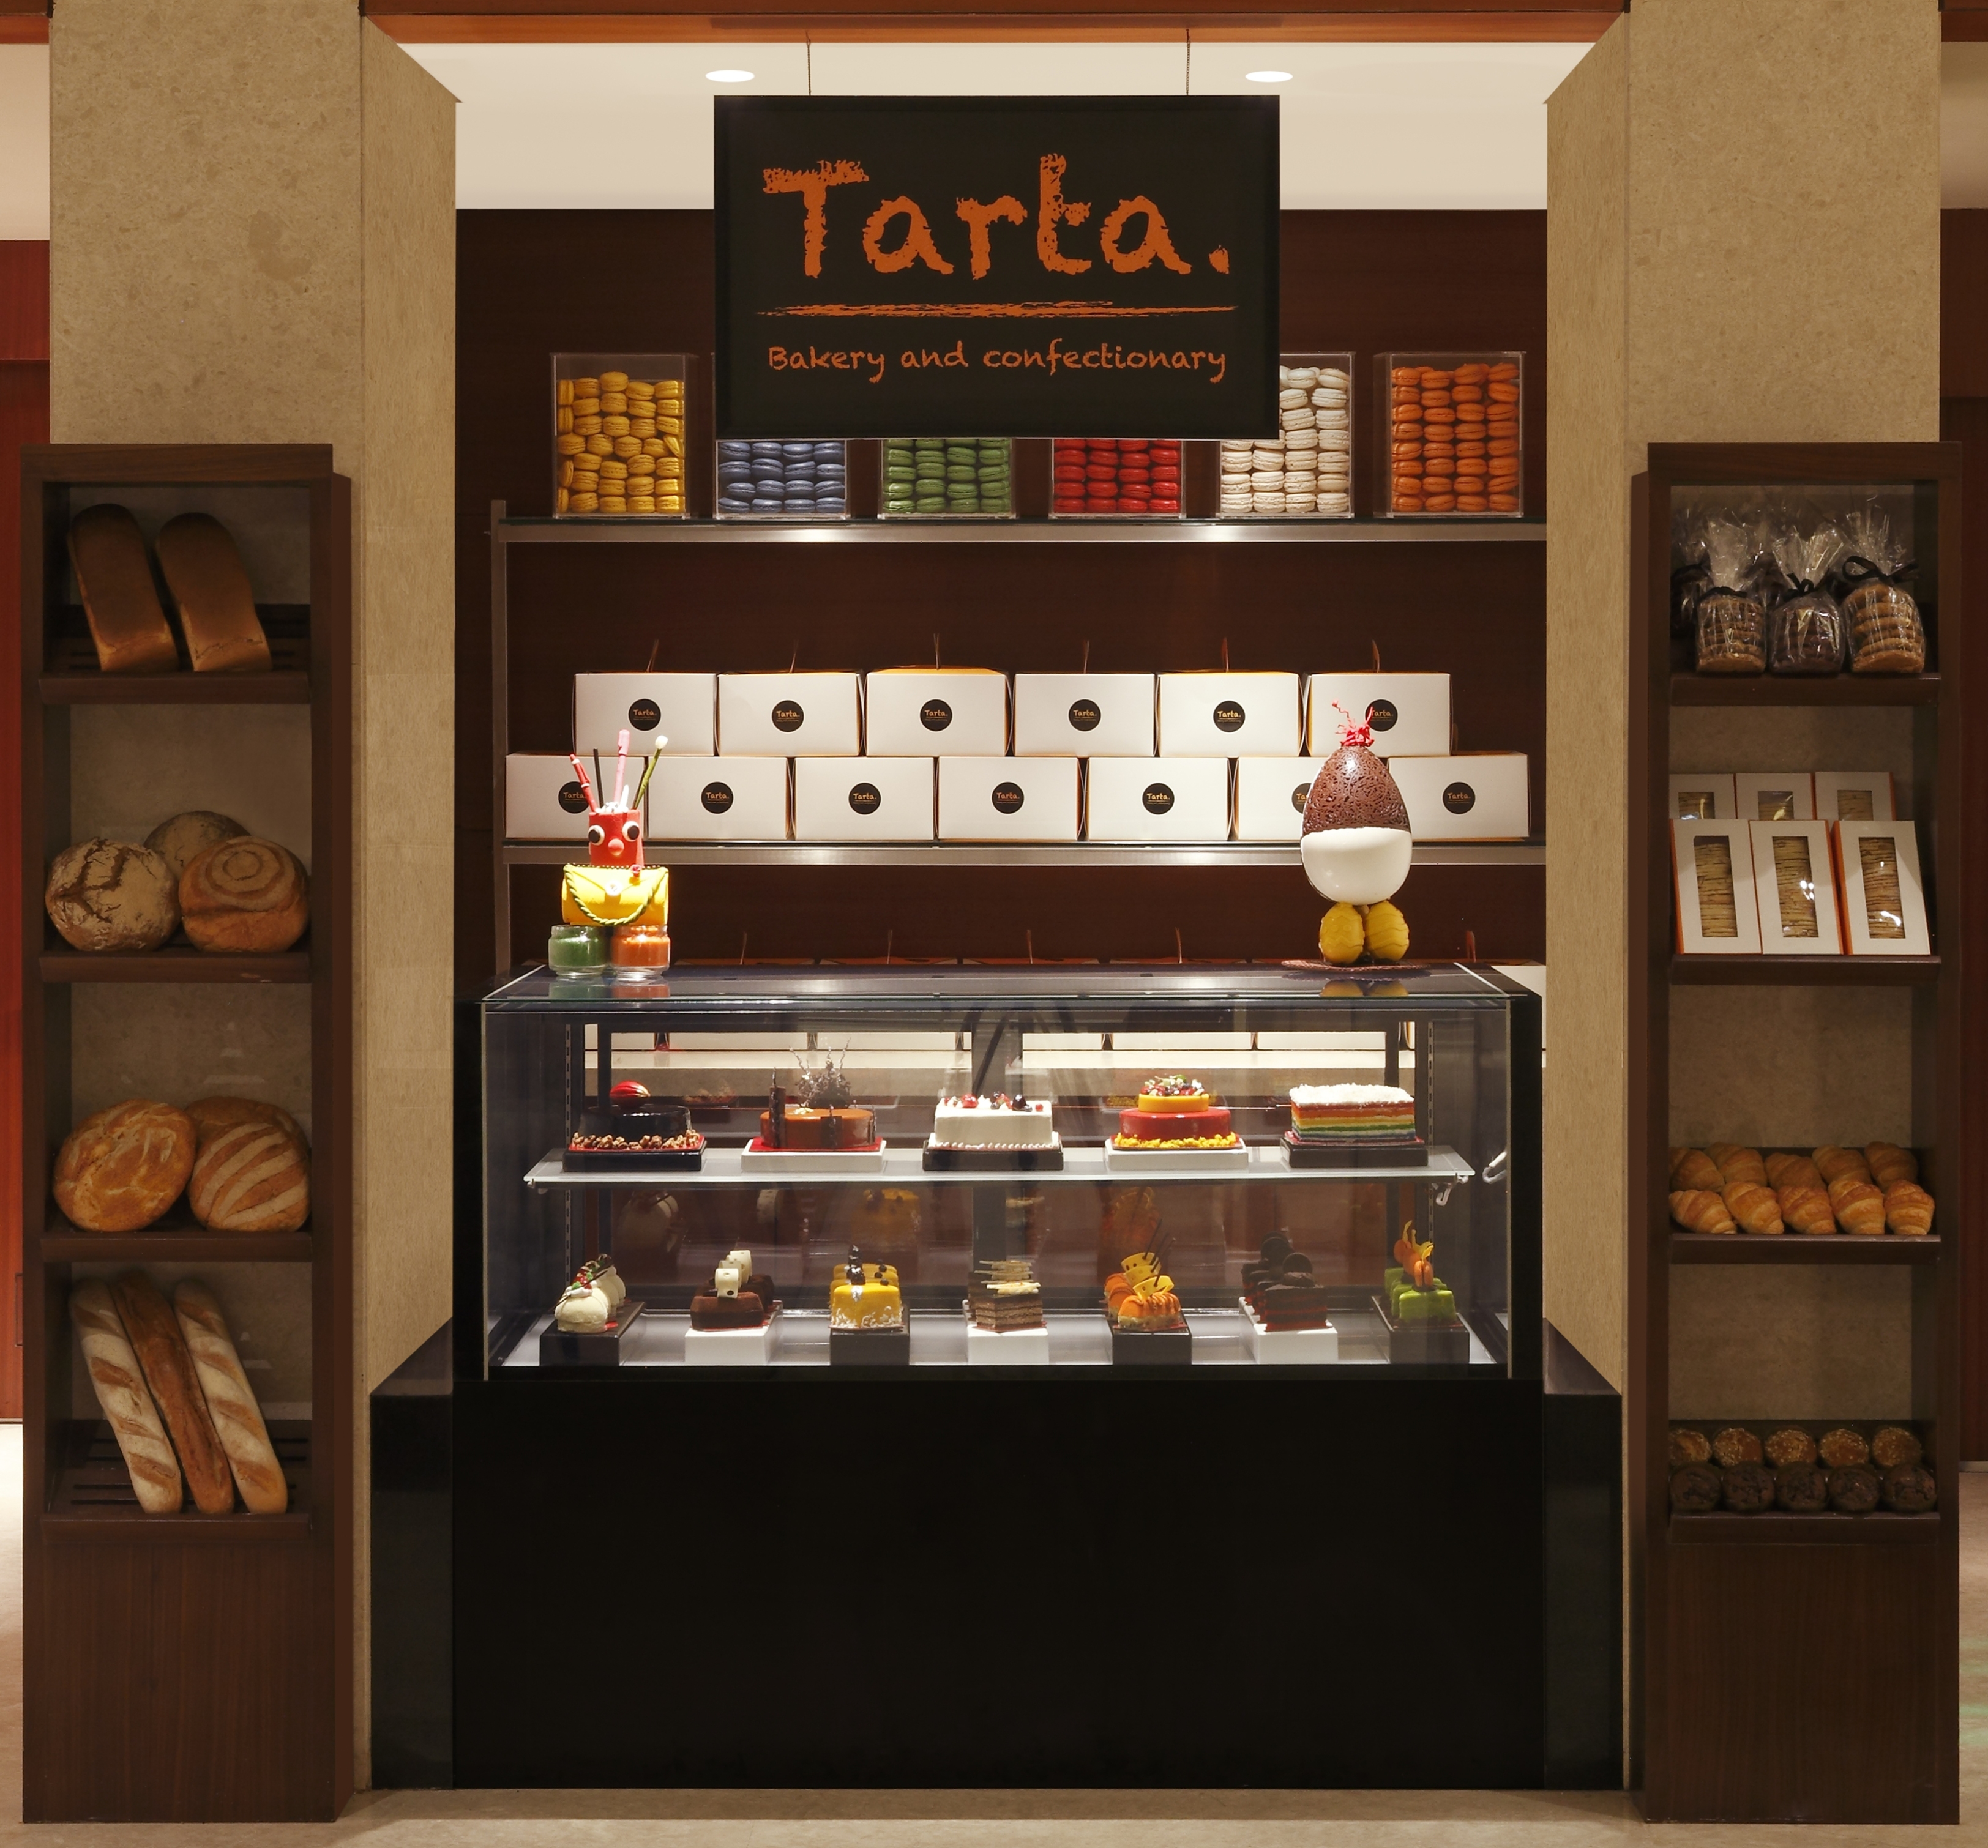 "Tarta Bakery and  Confectionary" Signage Above Display Case and Shelves With Baked Items For Sale